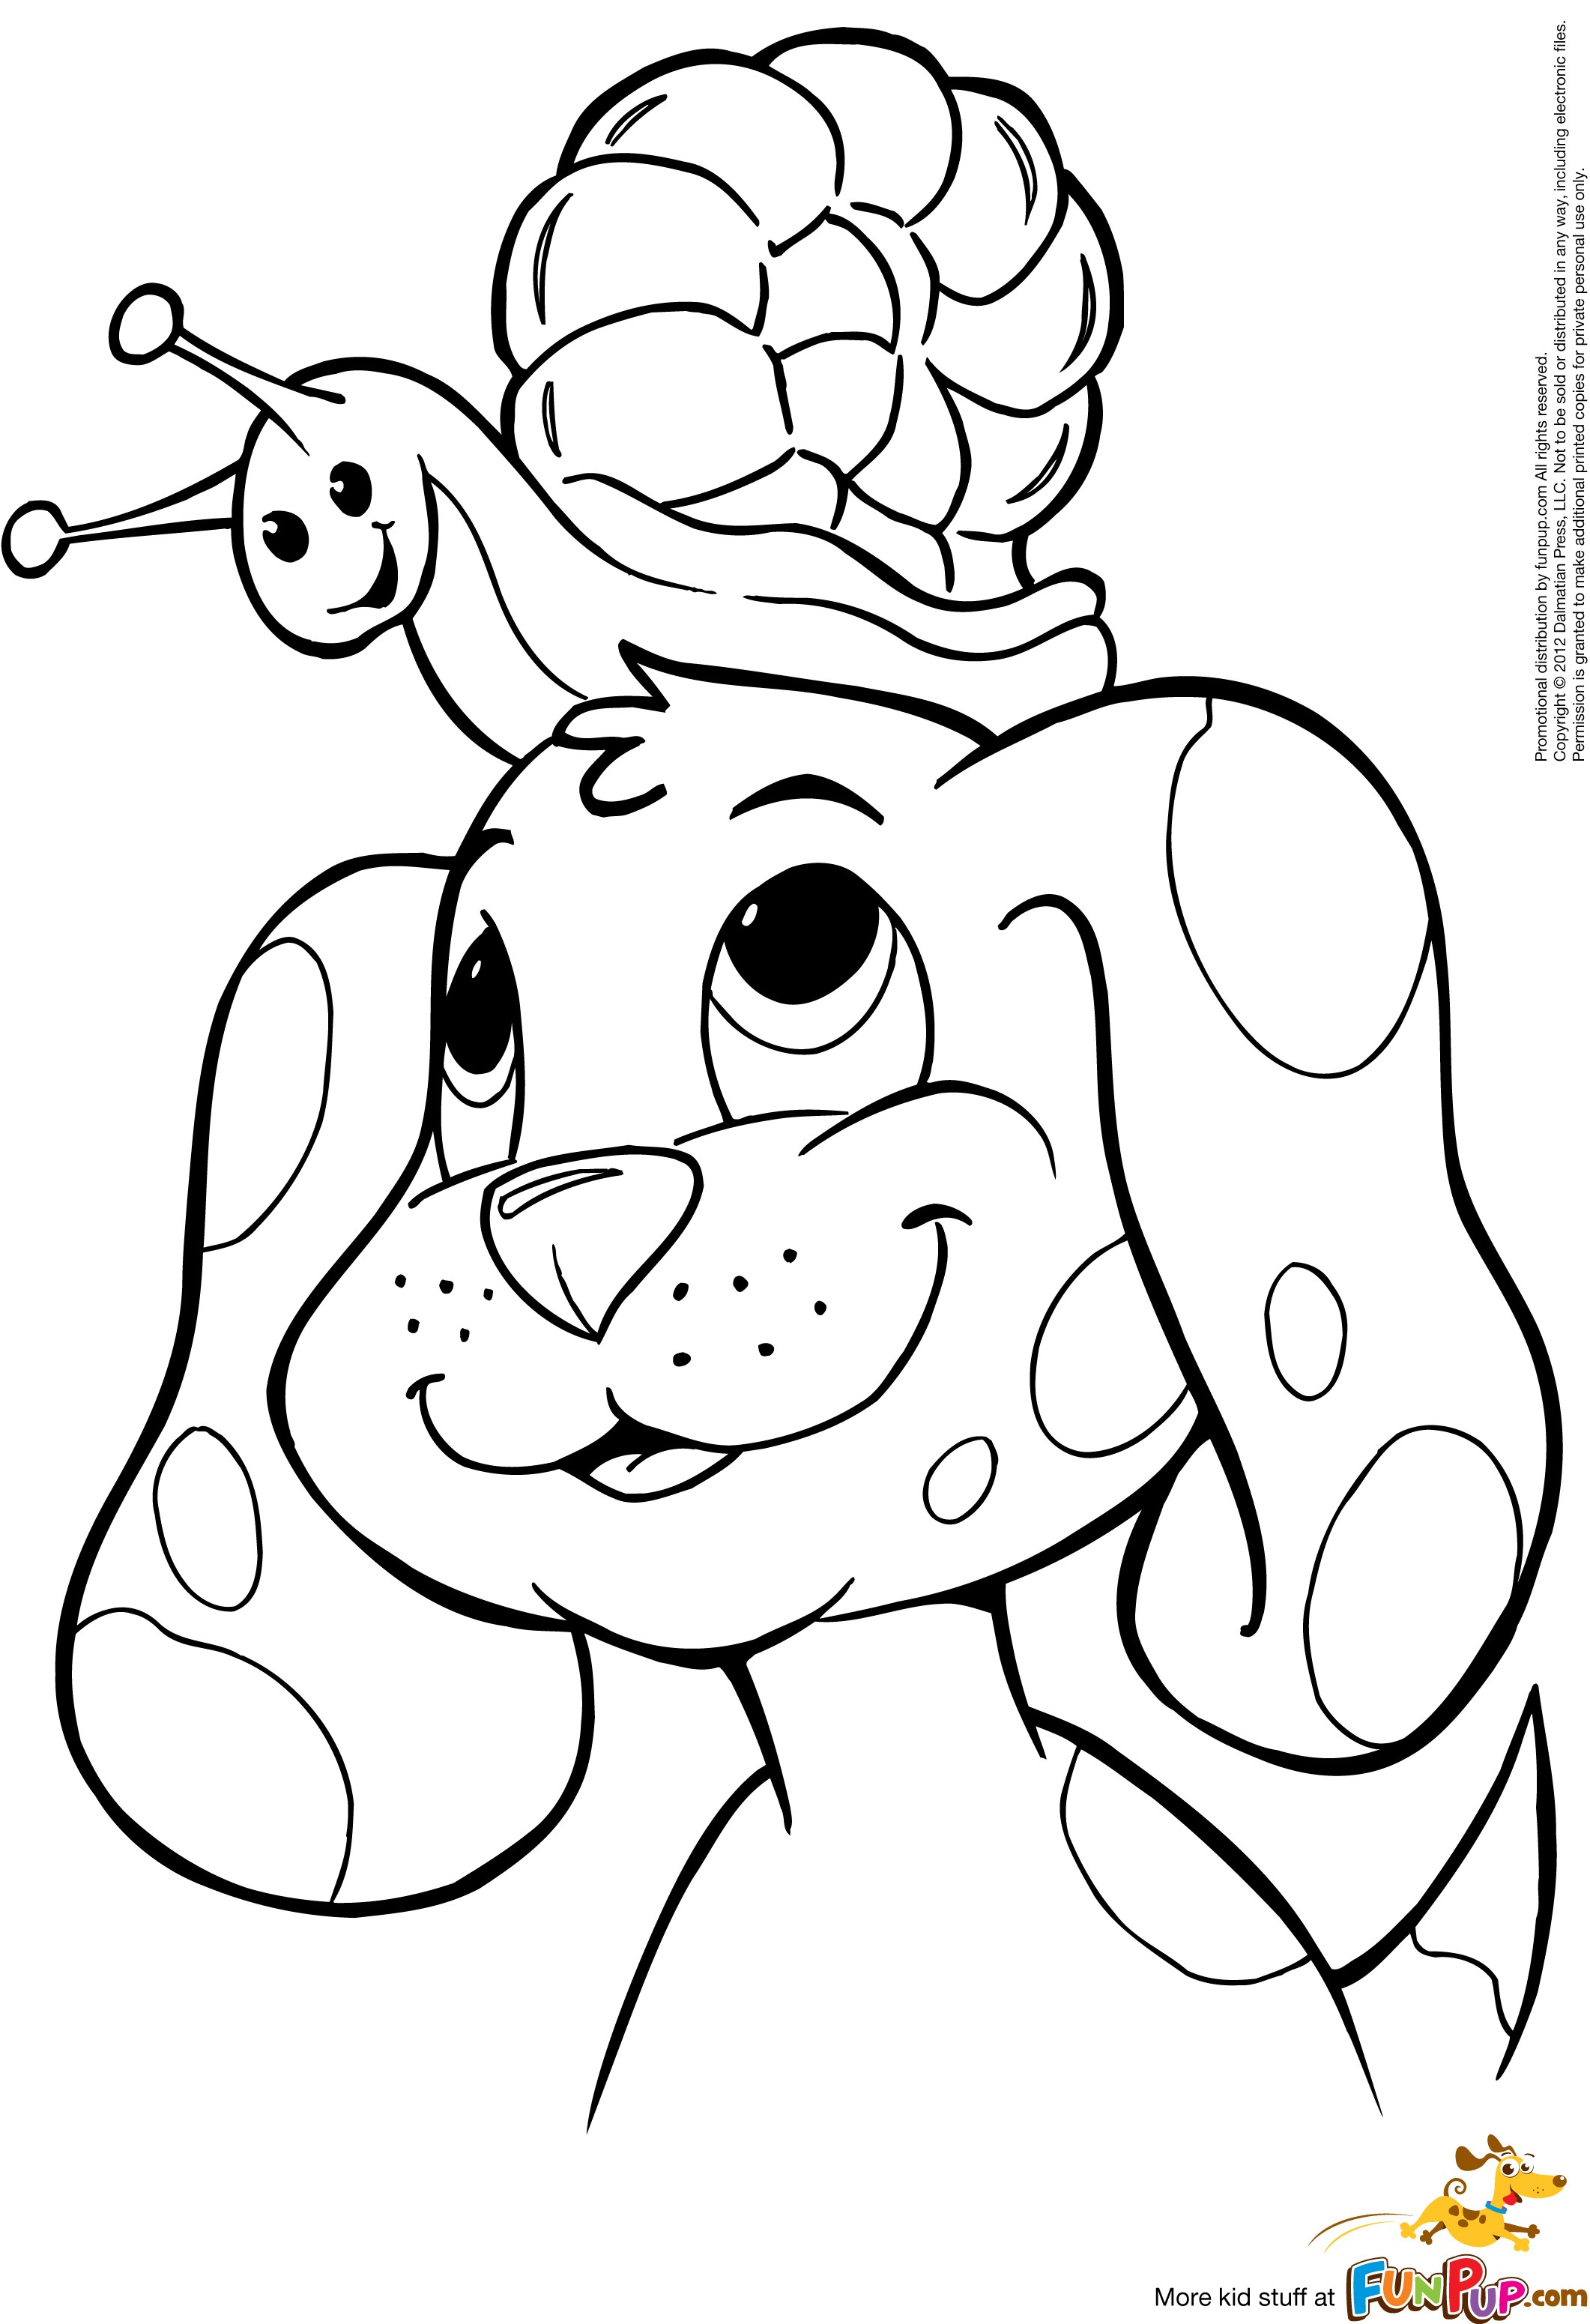 Easy Puppy Coloring Pages at GetColorings.com | Free printable